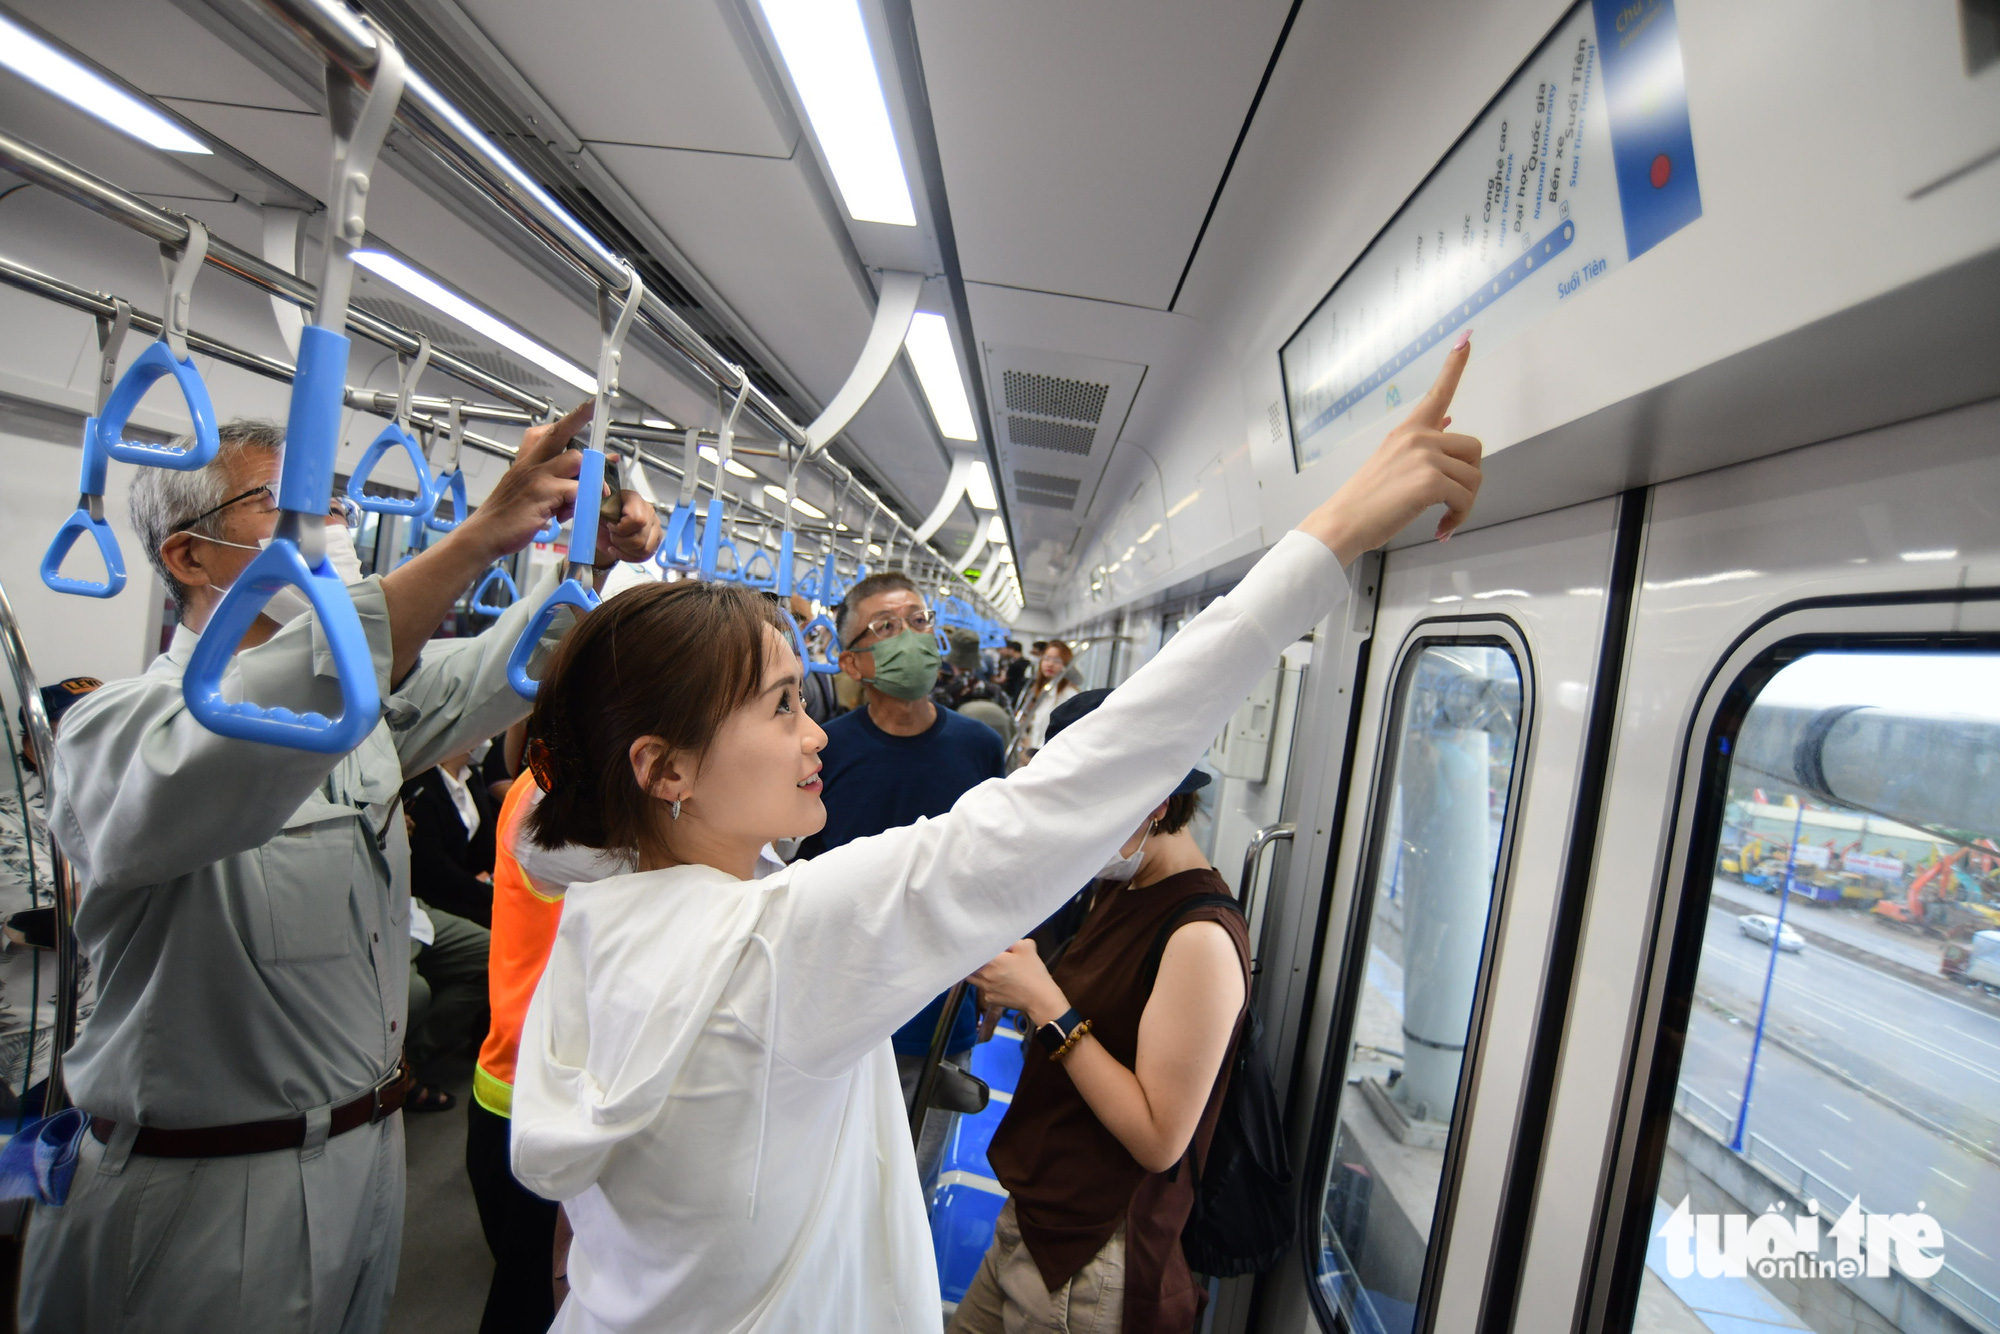 Passengers watch a list of stations near the entrance of the metro train. Photo: Quang Dinh / Tuoi Tre